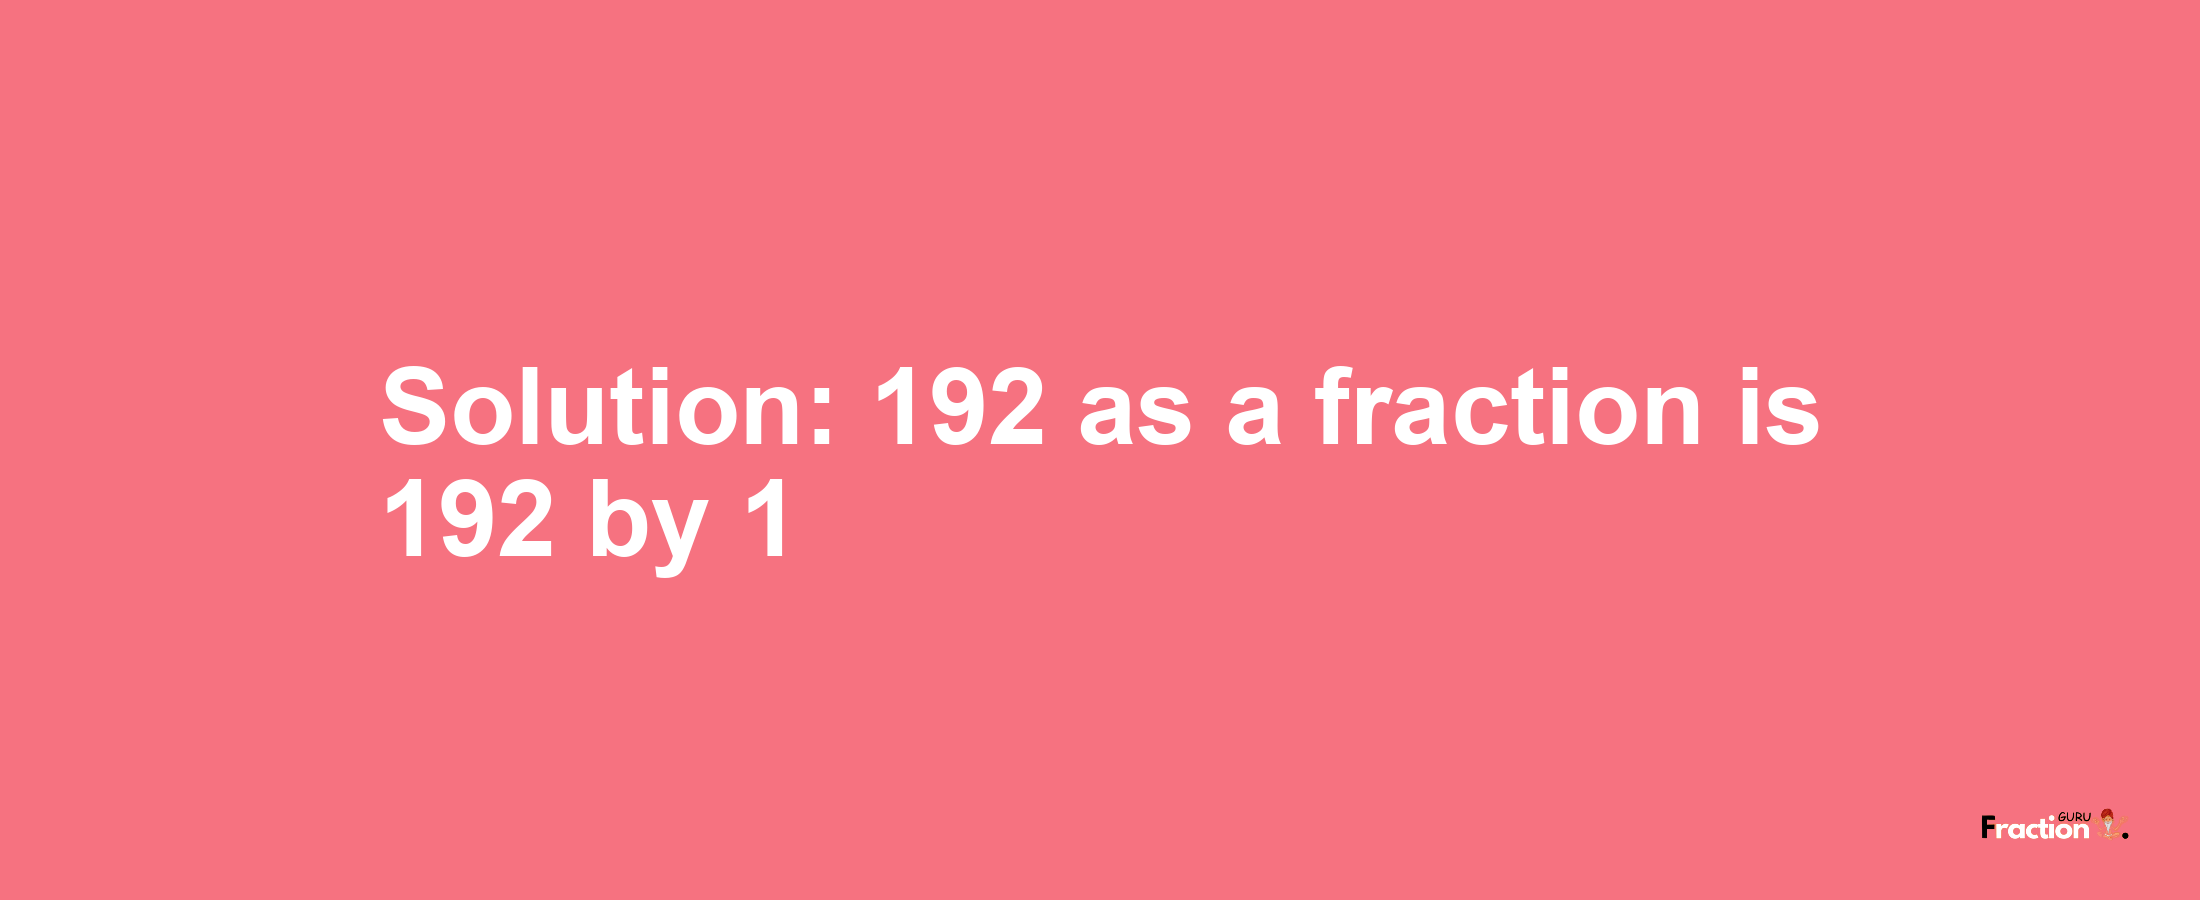 Solution:192 as a fraction is 192/1